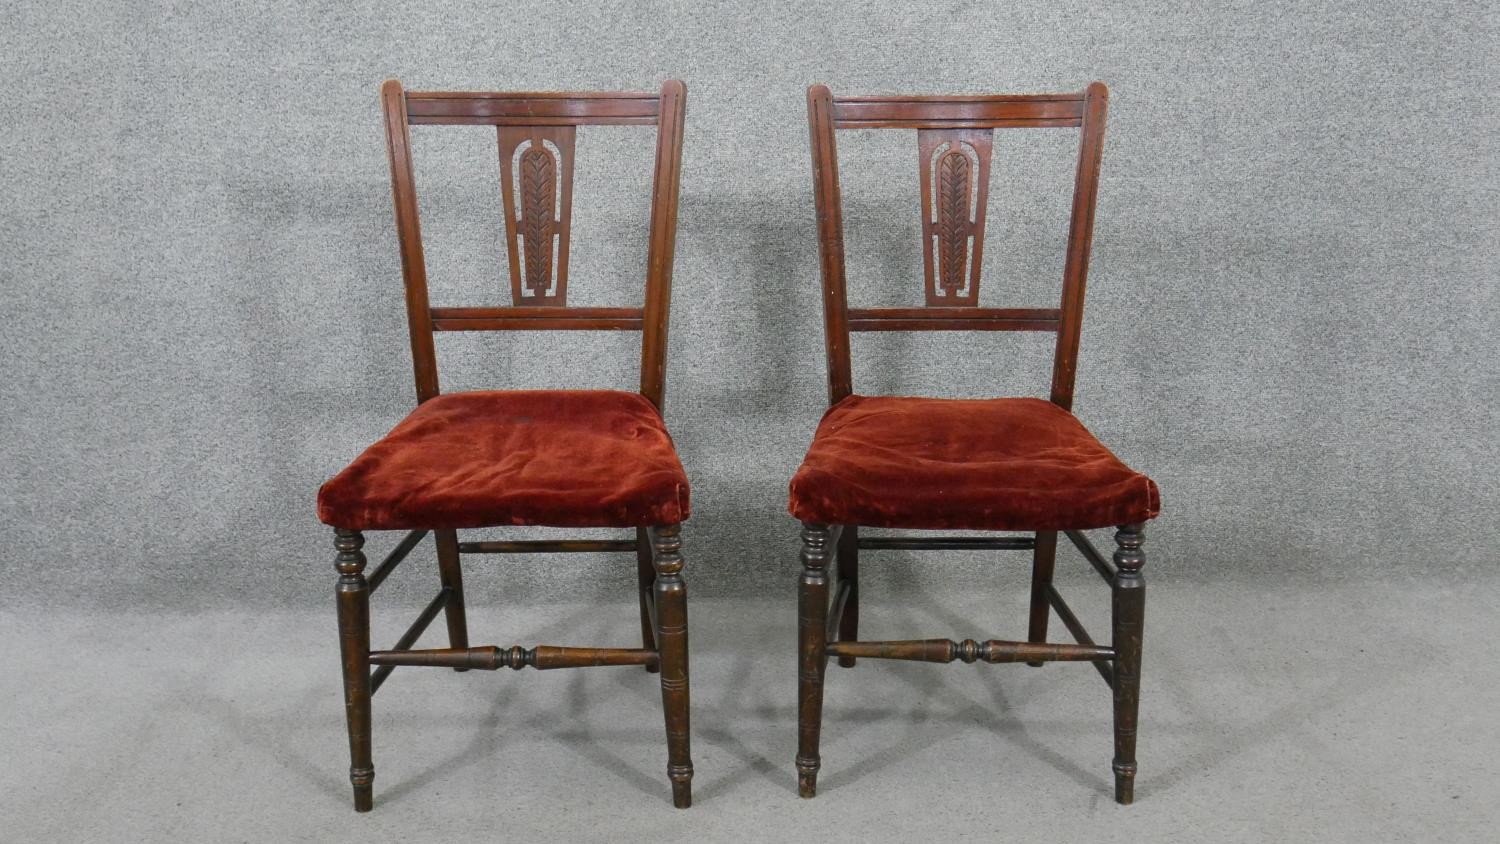 A pair of Edwardian walnut side chairs, the back with a carved foliate splat, over a red velour